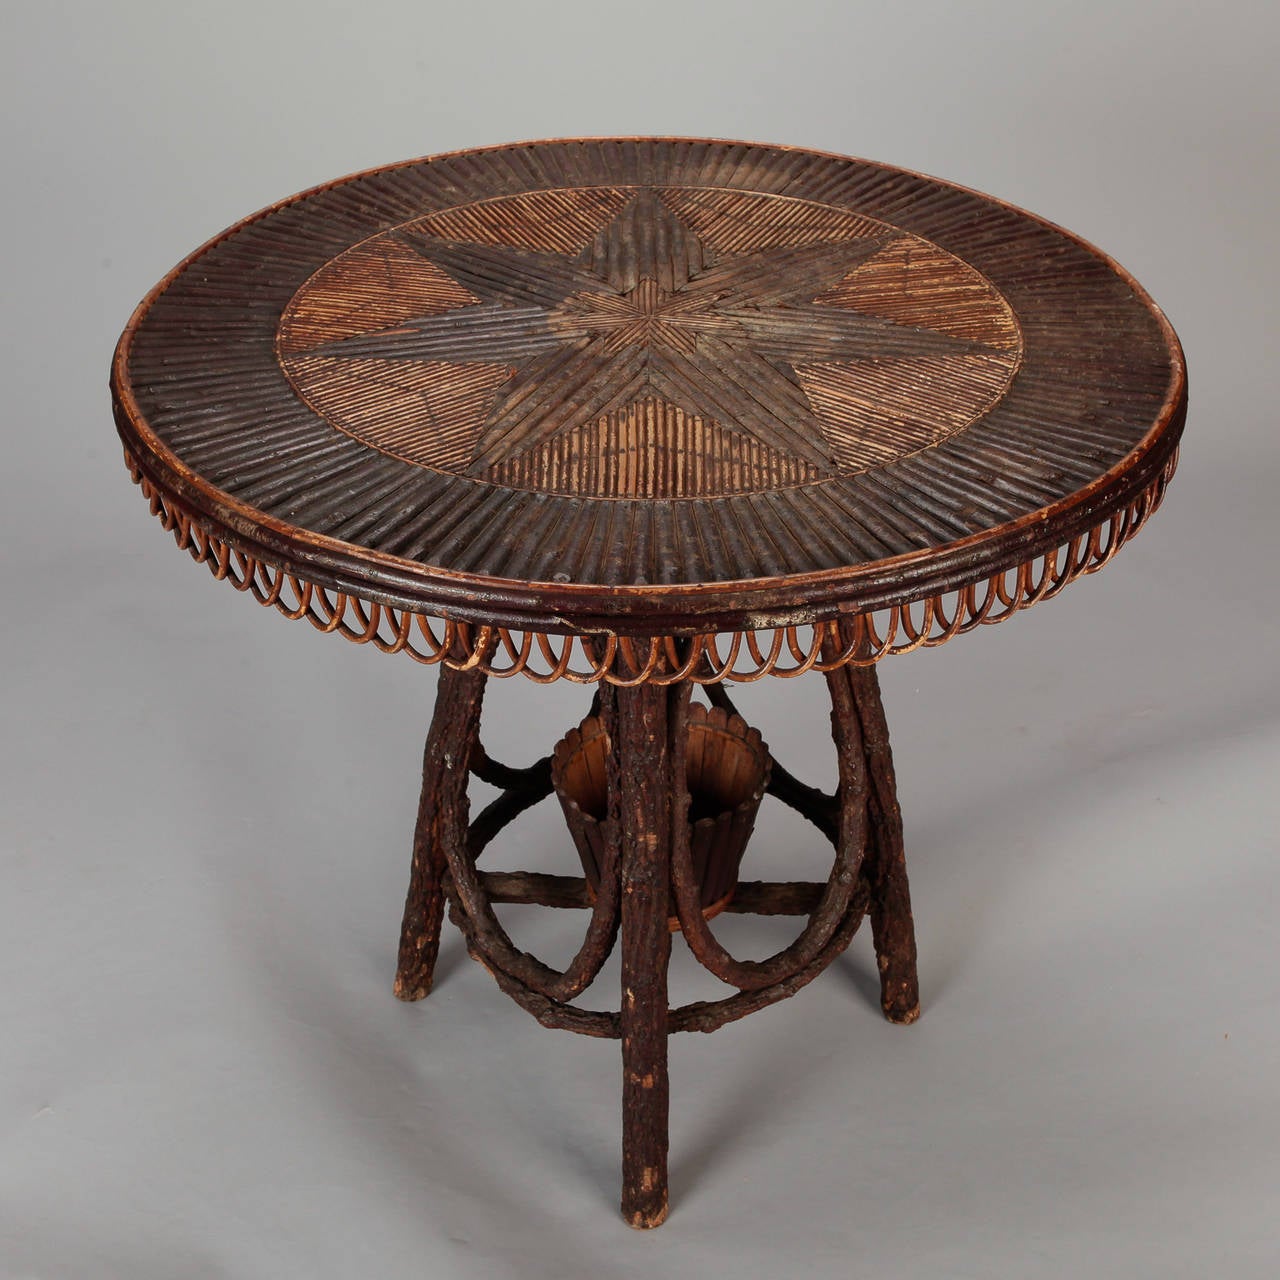 Folk Art French Round Bent Willow Twig Table With Star Design Inlay